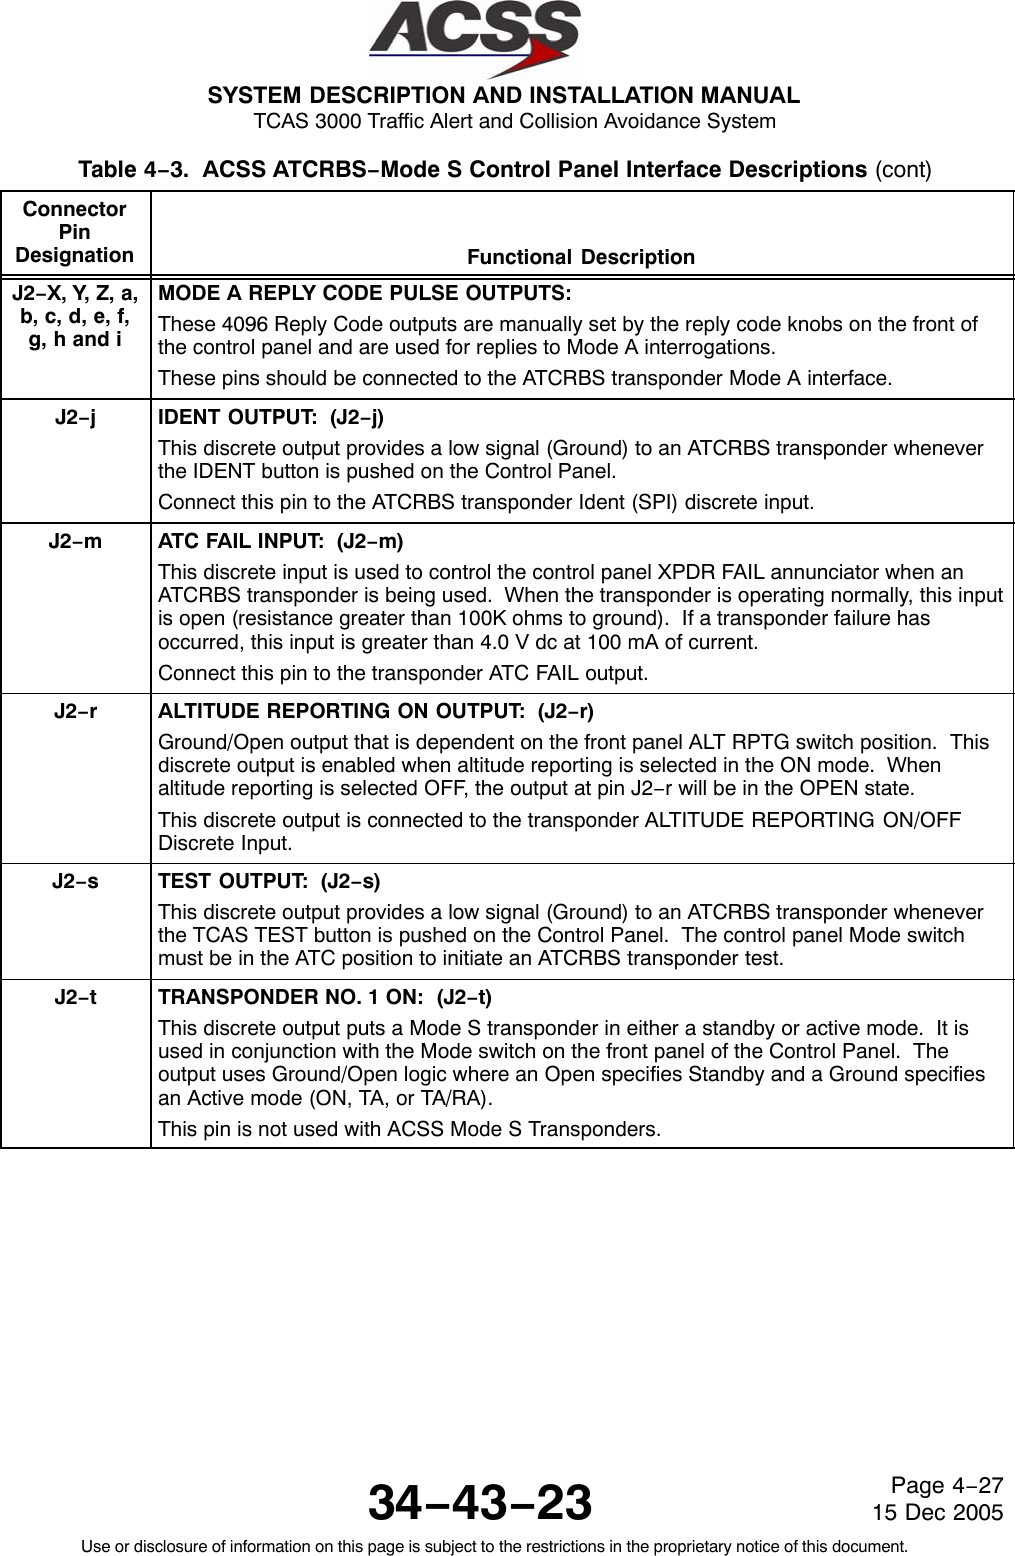 SYSTEM DESCRIPTION AND INSTALLATION MANUAL TCAS 3000 Traffic Alert and Collision Avoidance System34−43−23Use or disclosure of information on this page is subject to the restrictions in the proprietary notice of this document.Page 4−2715 Dec 2005Table 4−3.  ACSS ATCRBS−Mode S Control Panel Interface Descriptions (cont)ConnectorPinDesignation Functional DescriptionJ2−X, Y, Z, a,b, c, d, e, f,g, h and iMODE A REPLY CODE PULSE OUTPUTS:These 4096 Reply Code outputs are manually set by the reply code knobs on the front ofthe control panel and are used for replies to Mode A interrogations.These pins should be connected to the ATCRBS transponder Mode A interface.J2−jIDENT OUTPUT:  (J2−j)This discrete output provides a low signal (Ground) to an ATCRBS transponder wheneverthe IDENT button is pushed on the Control Panel.Connect this pin to the ATCRBS transponder Ident (SPI) discrete input.J2−mATC FAIL INPUT:  (J2−m)This discrete input is used to control the control panel XPDR FAIL annunciator when anATCRBS transponder is being used.  When the transponder is operating normally, this inputis open (resistance greater than 100K ohms to ground).  If a transponder failure hasoccurred, this input is greater than 4.0 V dc at 100 mA of current.Connect this pin to the transponder ATC FAIL output.J2−rALTITUDE REPORTING ON OUTPUT:  (J2−r)Ground/Open output that is dependent on the front panel ALT RPTG switch position.  Thisdiscrete output is enabled when altitude reporting is selected in the ON mode.  Whenaltitude reporting is selected OFF, the output at pin J2−r will be in the OPEN state.This discrete output is connected to the transponder ALTITUDE REPORTING ON/OFFDiscrete Input.J2−sTEST OUTPUT:  (J2−s)This discrete output provides a low signal (Ground) to an ATCRBS transponder wheneverthe TCAS TEST button is pushed on the Control Panel.  The control panel Mode switchmust be in the ATC position to initiate an ATCRBS transponder test.J2−tTRANSPONDER NO. 1 ON:  (J2−t)This discrete output puts a Mode S transponder in either a standby or active mode.  It isused in conjunction with the Mode switch on the front panel of the Control Panel.  Theoutput uses Ground/Open logic where an Open specifies Standby and a Ground specifiesan Active mode (ON, TA, or TA/RA).This pin is not used with ACSS Mode S Transponders.